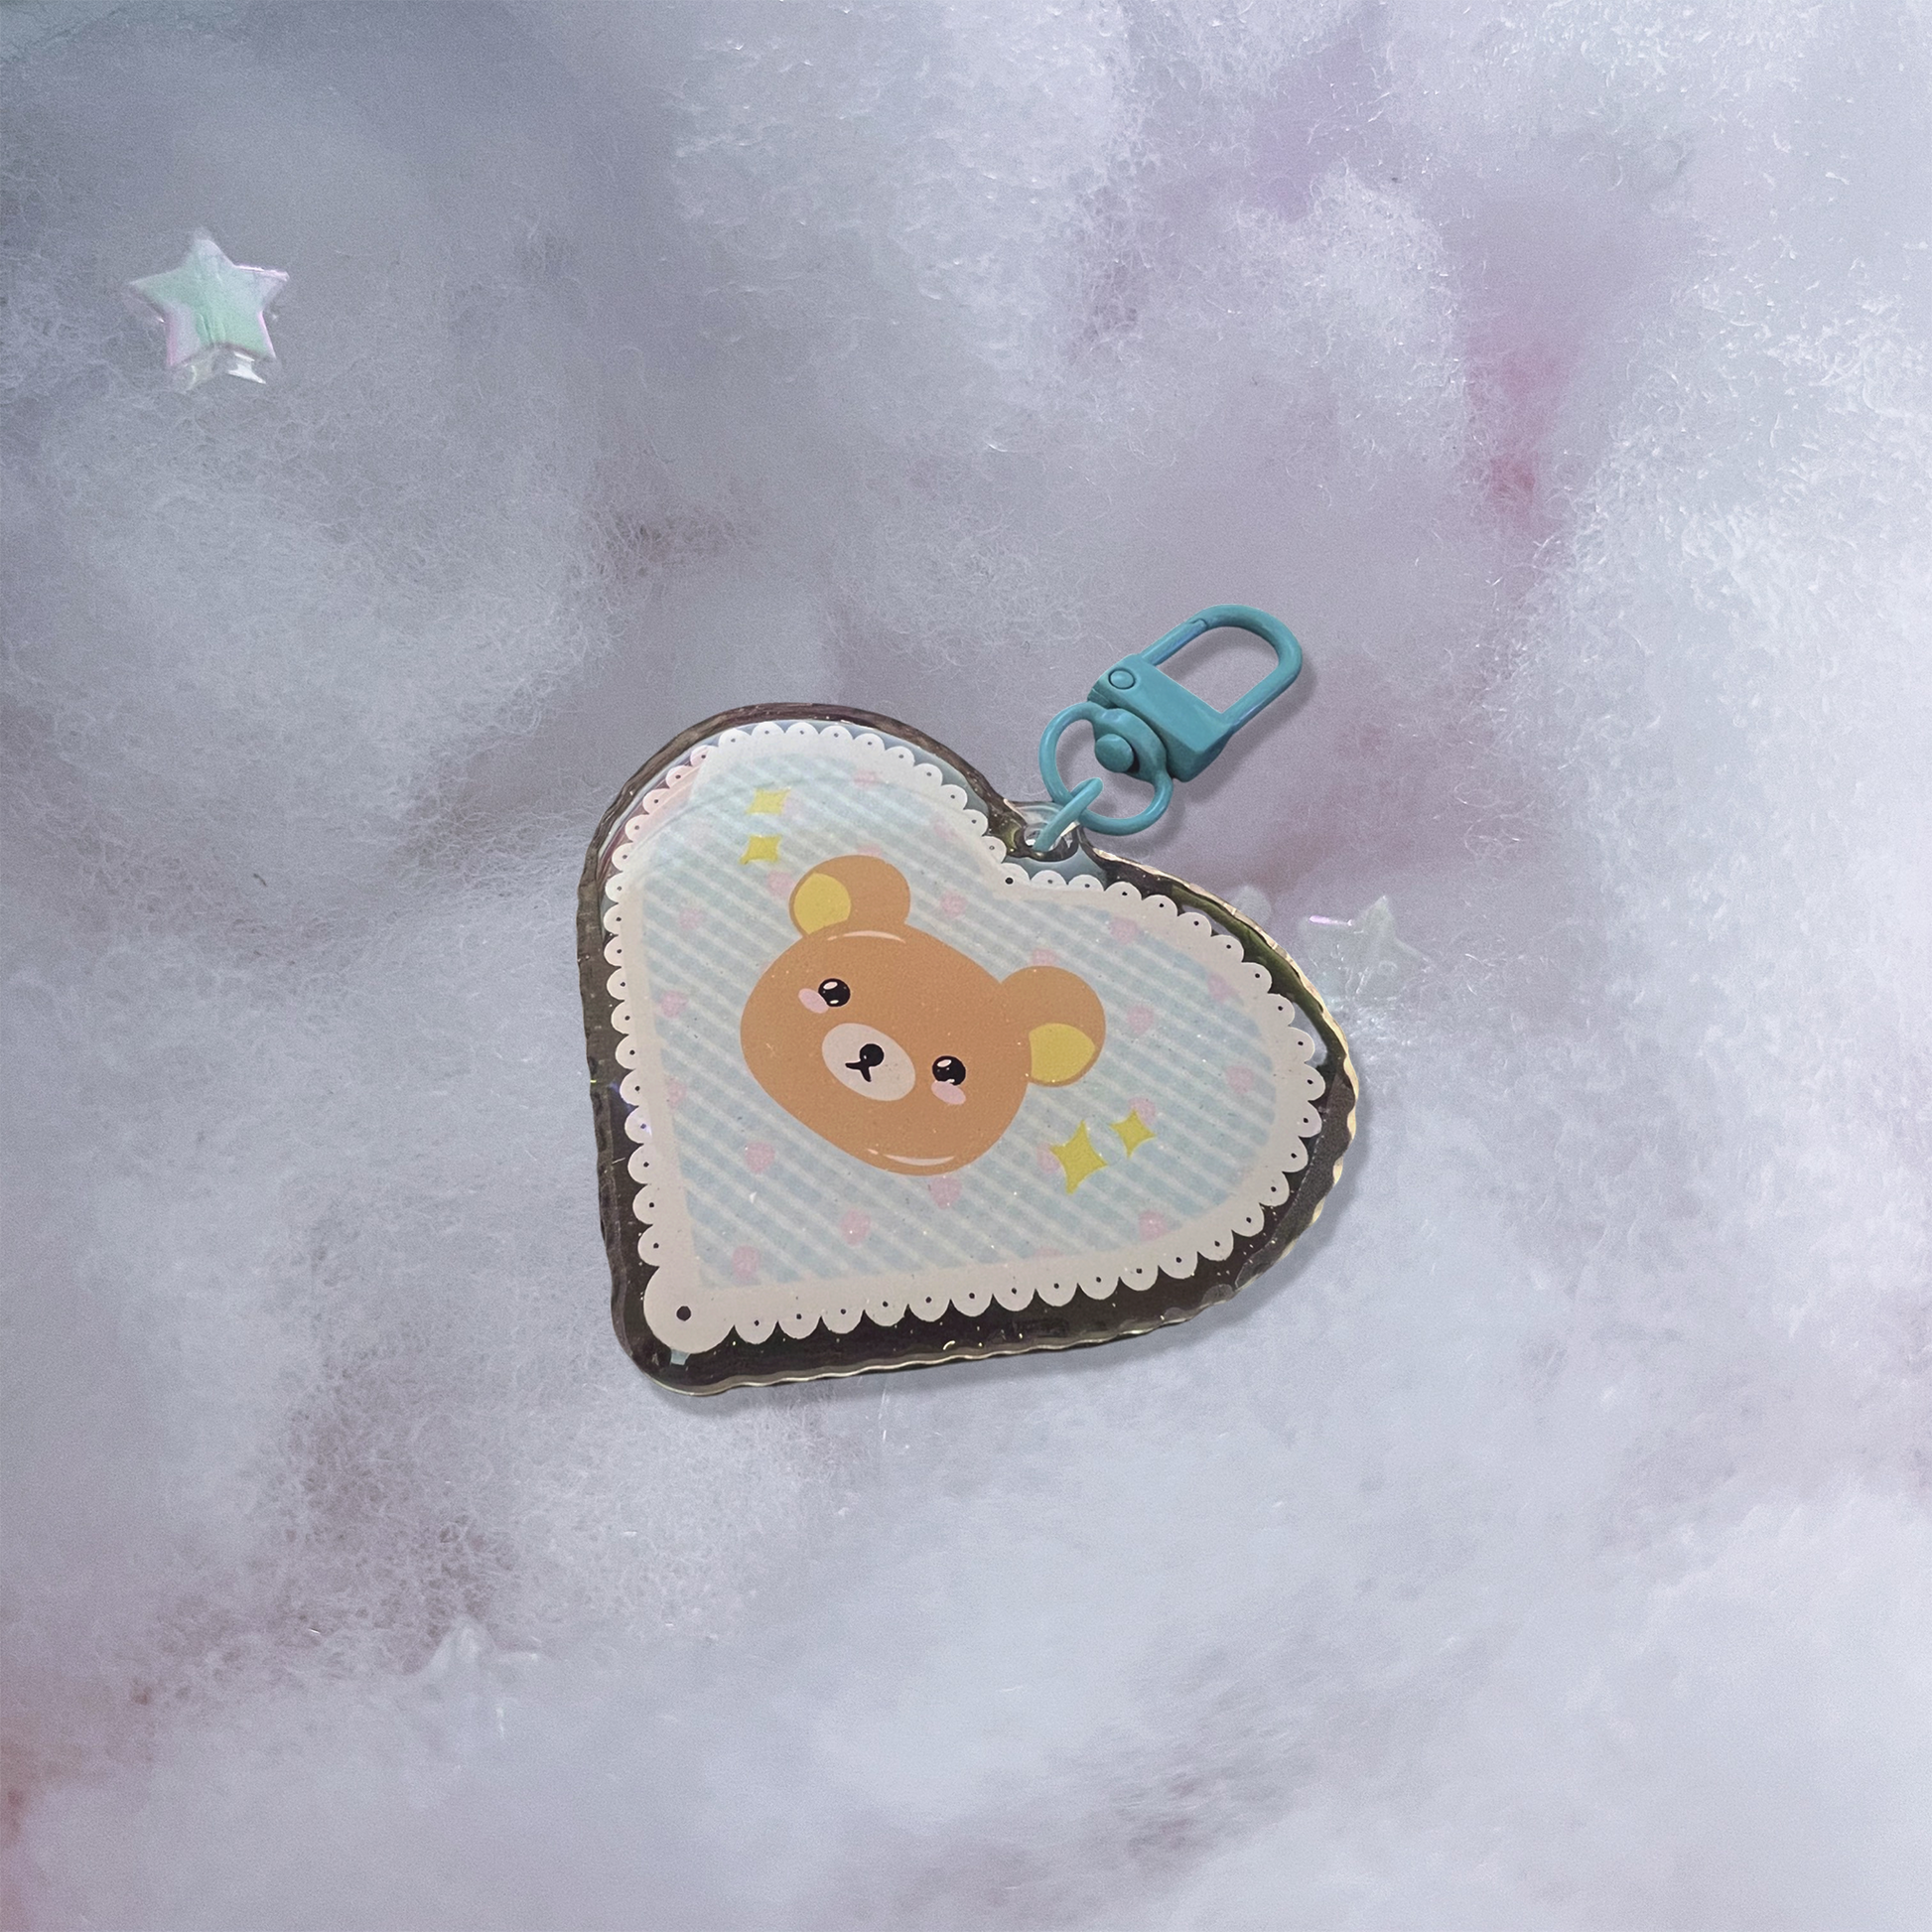 Brown bear acrylic keychain with micro-glitter finish and blue hook.